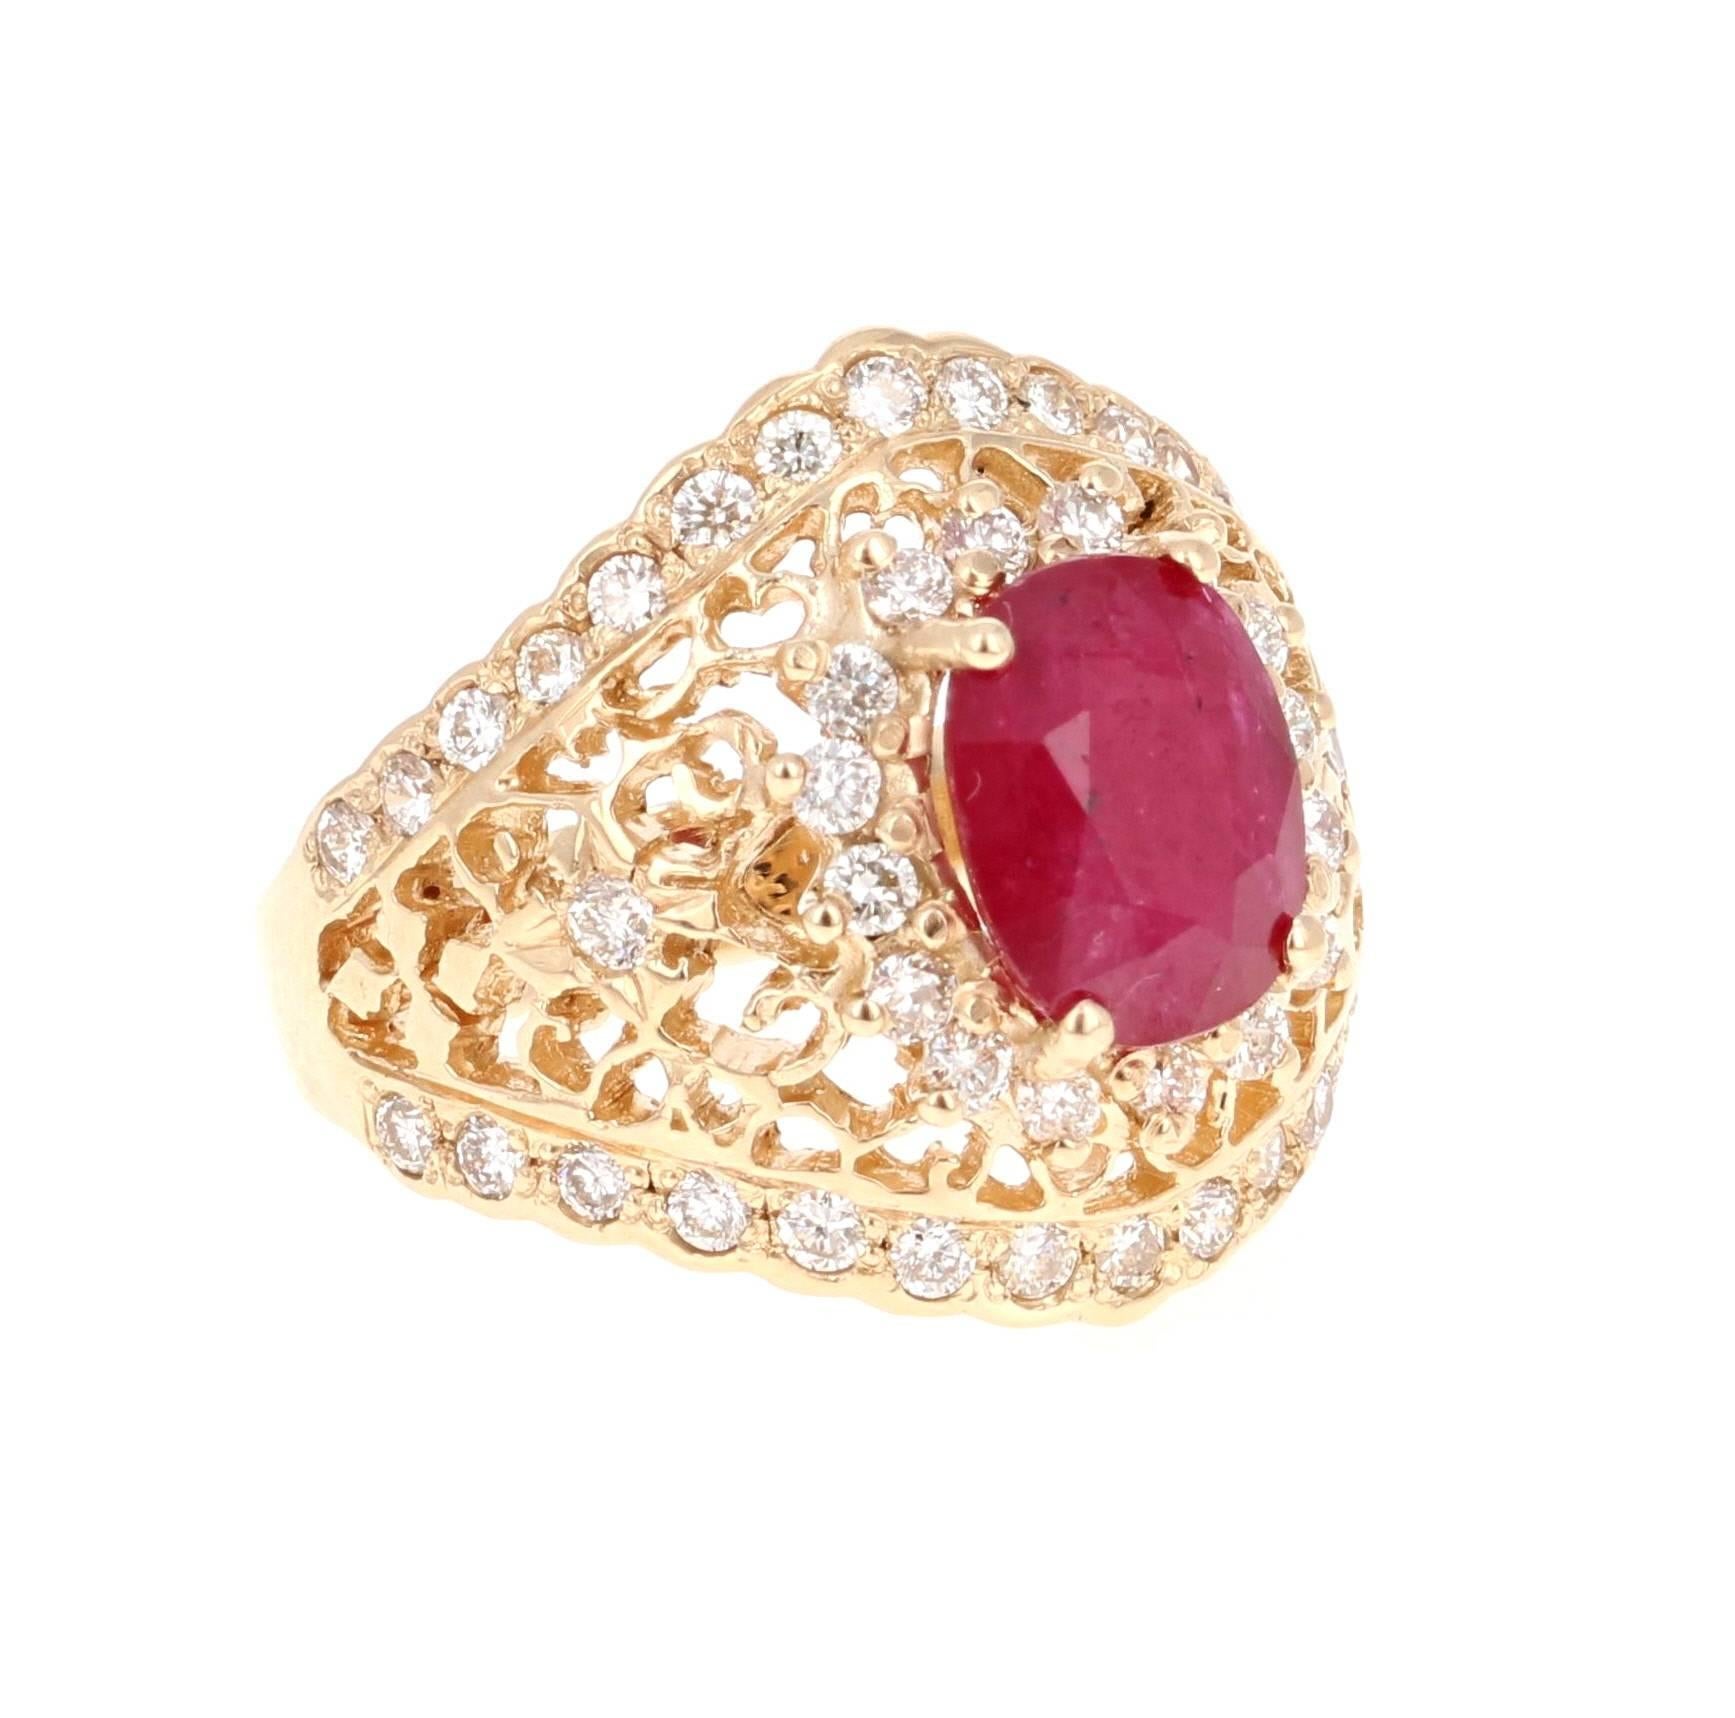 The Oval Cut Ruby is 2.68 carats and is surrounded by 48 Round Cut Diamonds that weigh 0.93 carat (Clarity: VS2, Color: H).  The ring is casted in 14K Yellow Gold and weighs approximately 6.8 grams.  

The ring is a size 7 and can be re-sized at no